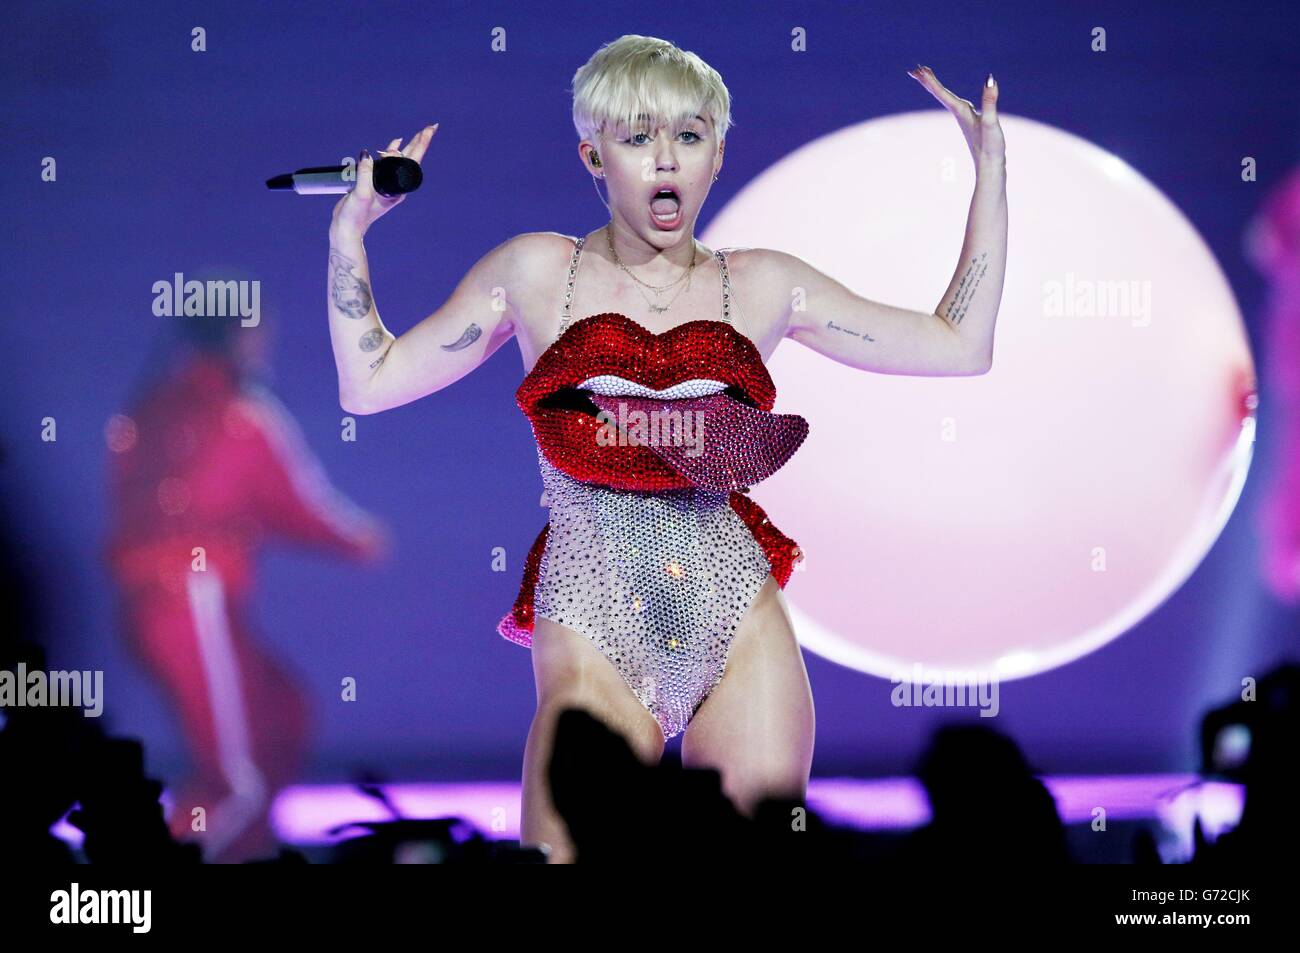 Miley Cyrus concert London. Miley Cyrus performs in concert at the O2